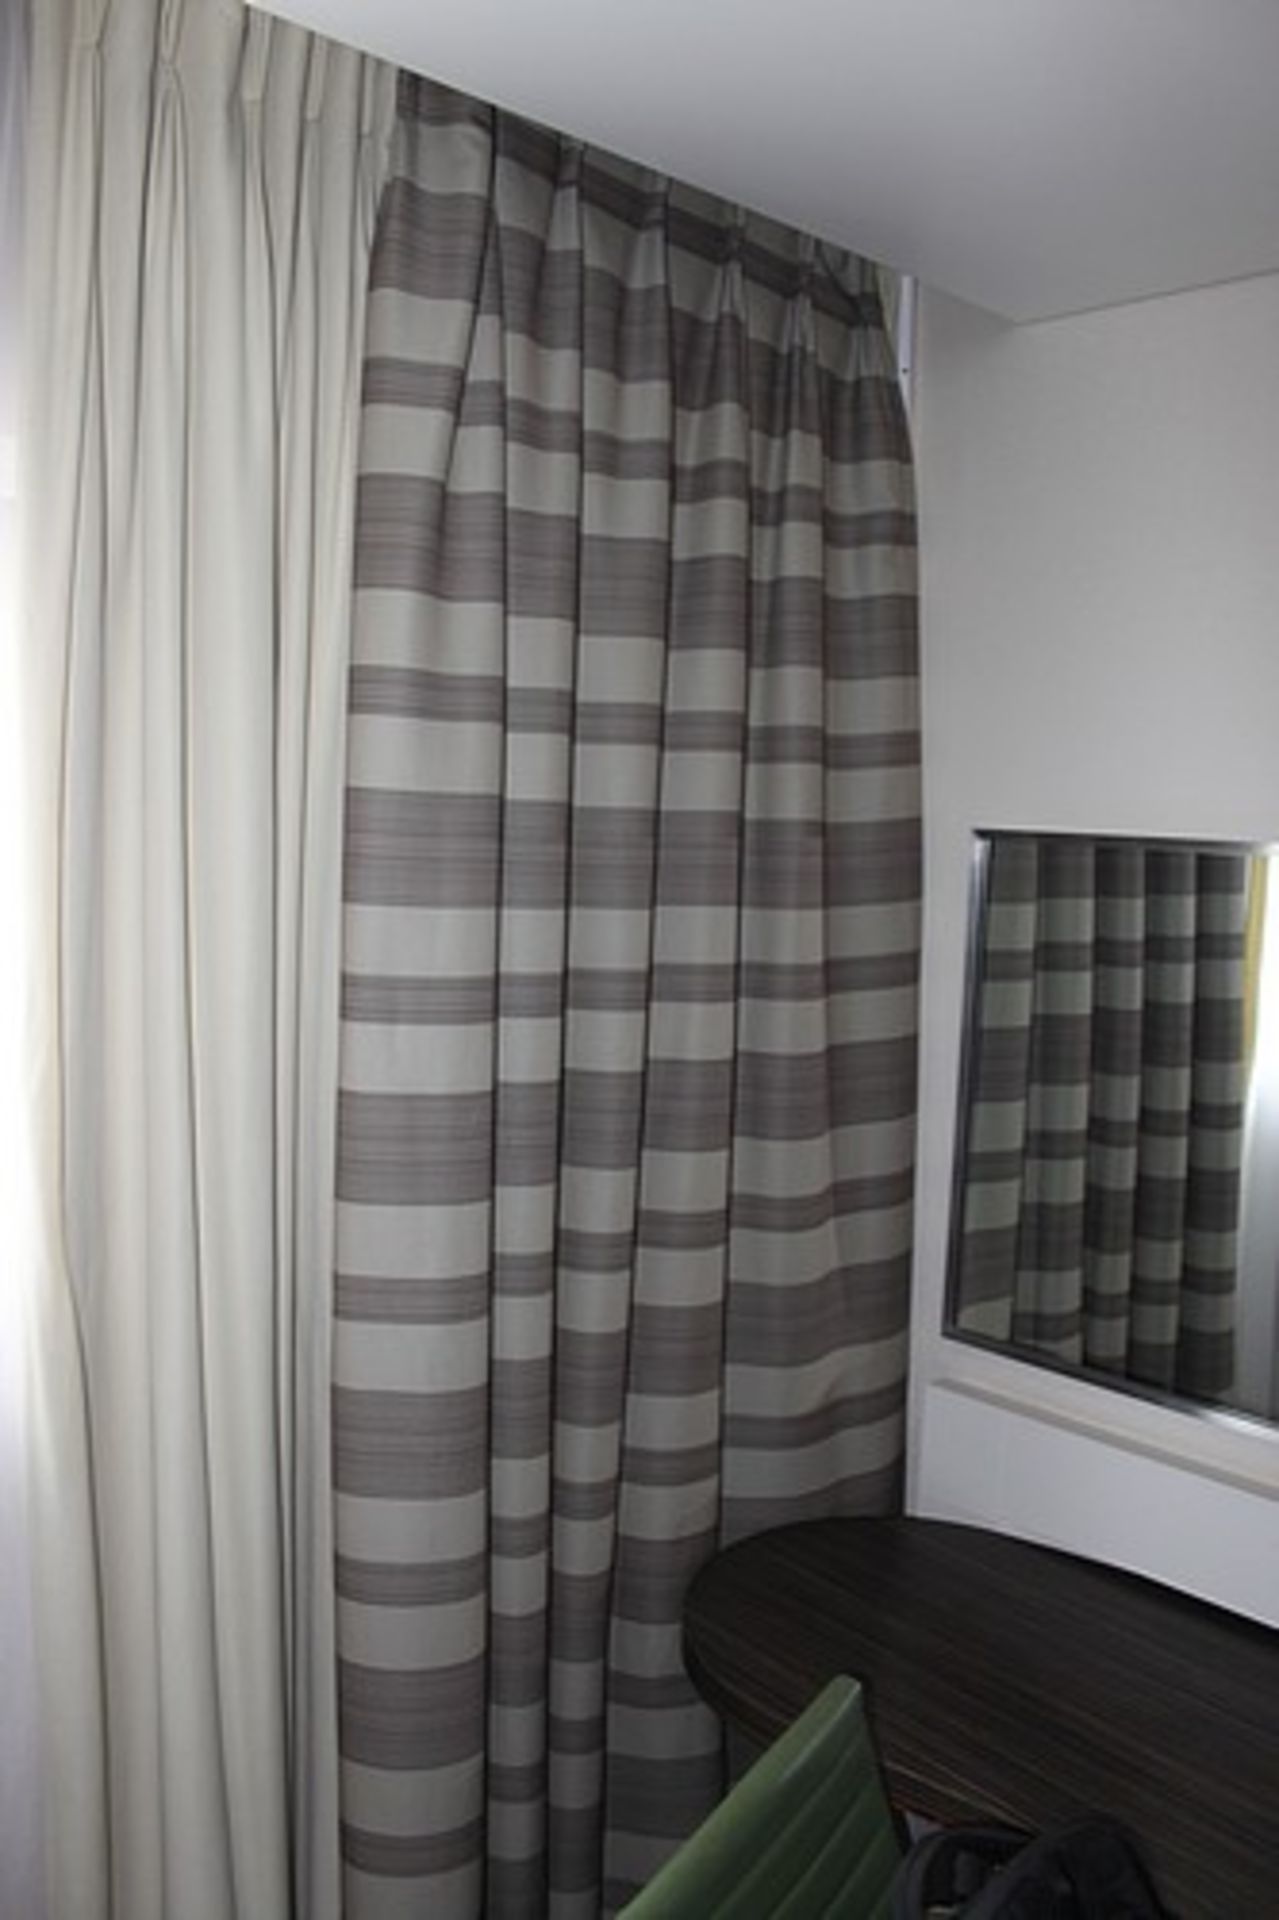 Sinclaire Fabrics a pair of drapes lined with blackout fabric spans 3500 x 2600mm (Exec) - Image 4 of 4